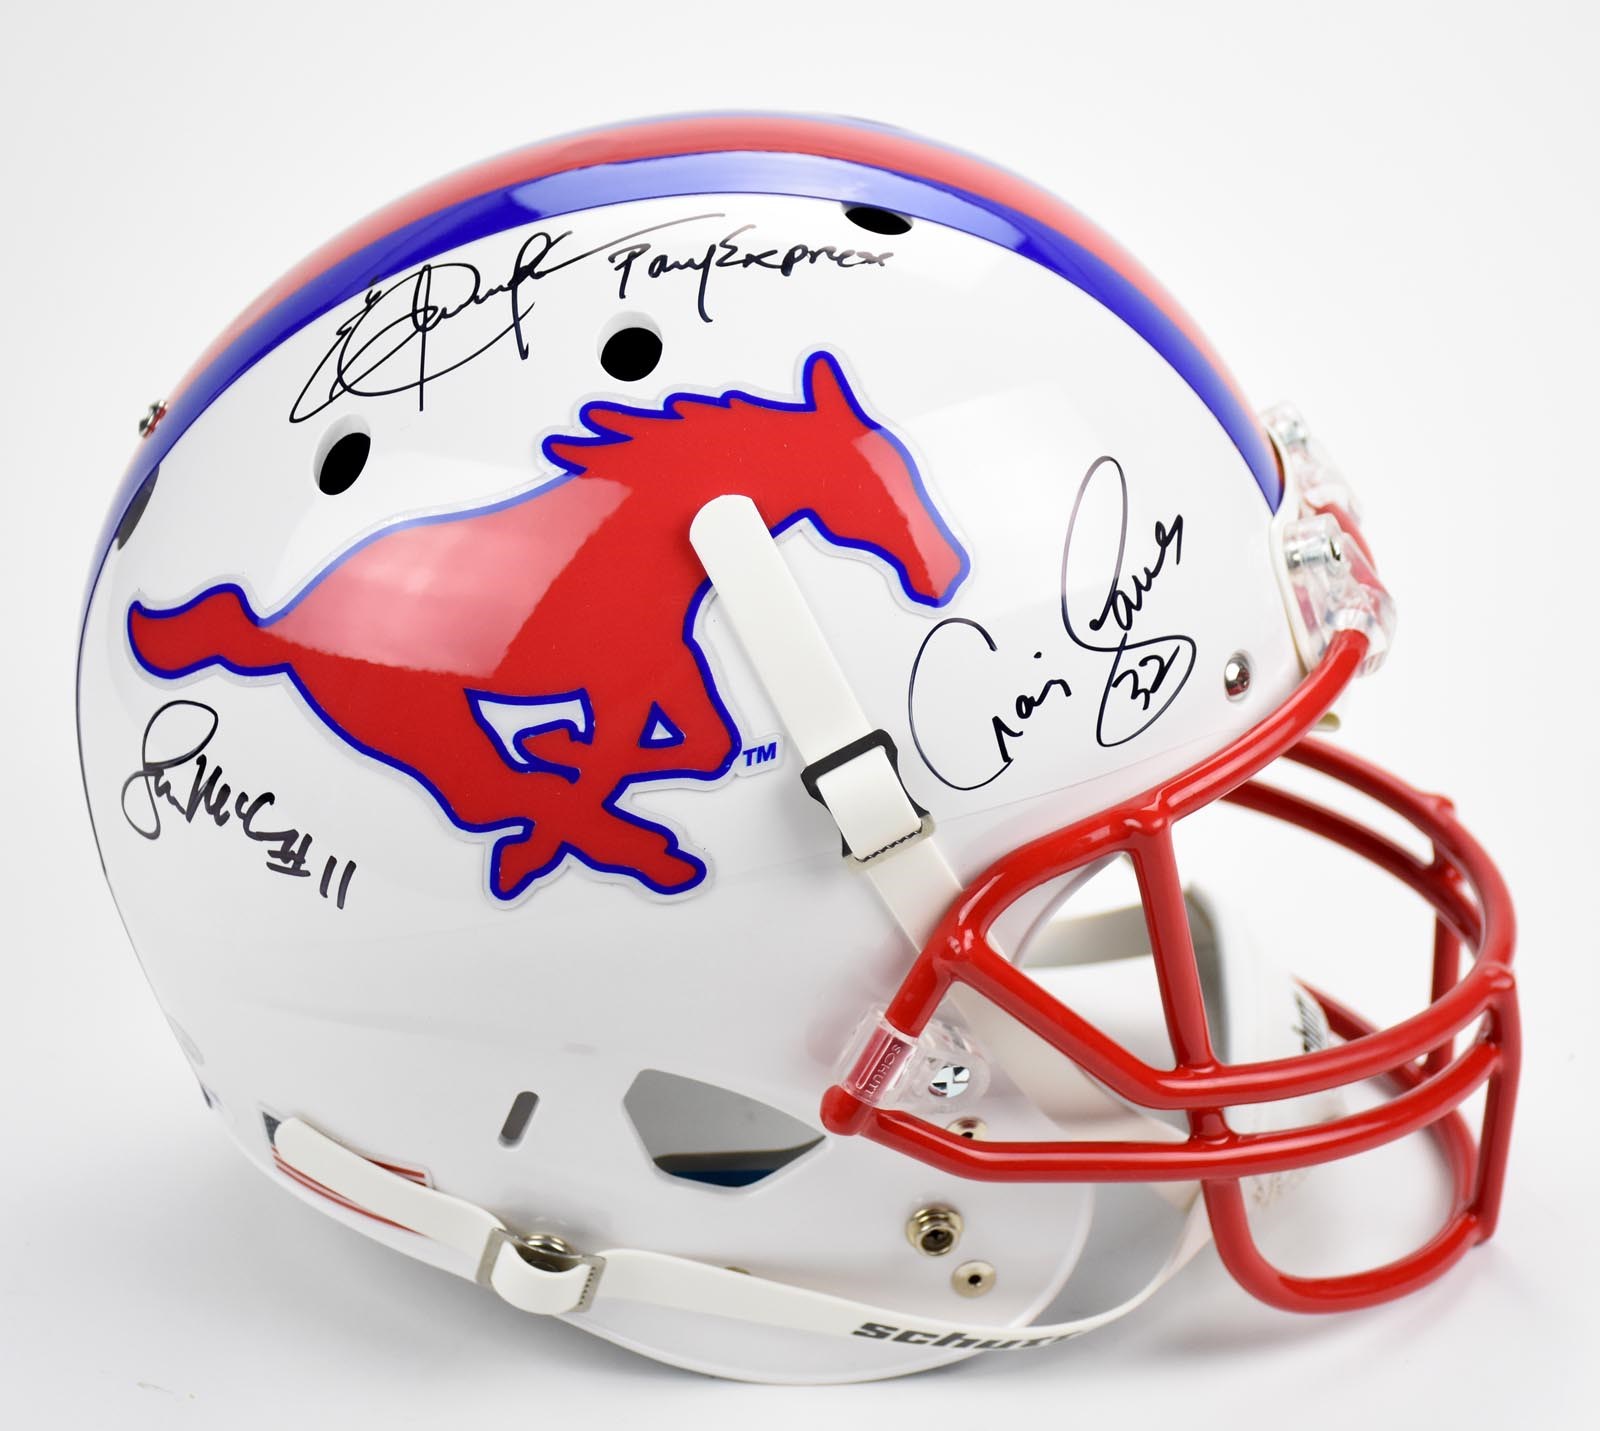 Eric Dickerson Signed SMU Helmet With Others PSA/DNA